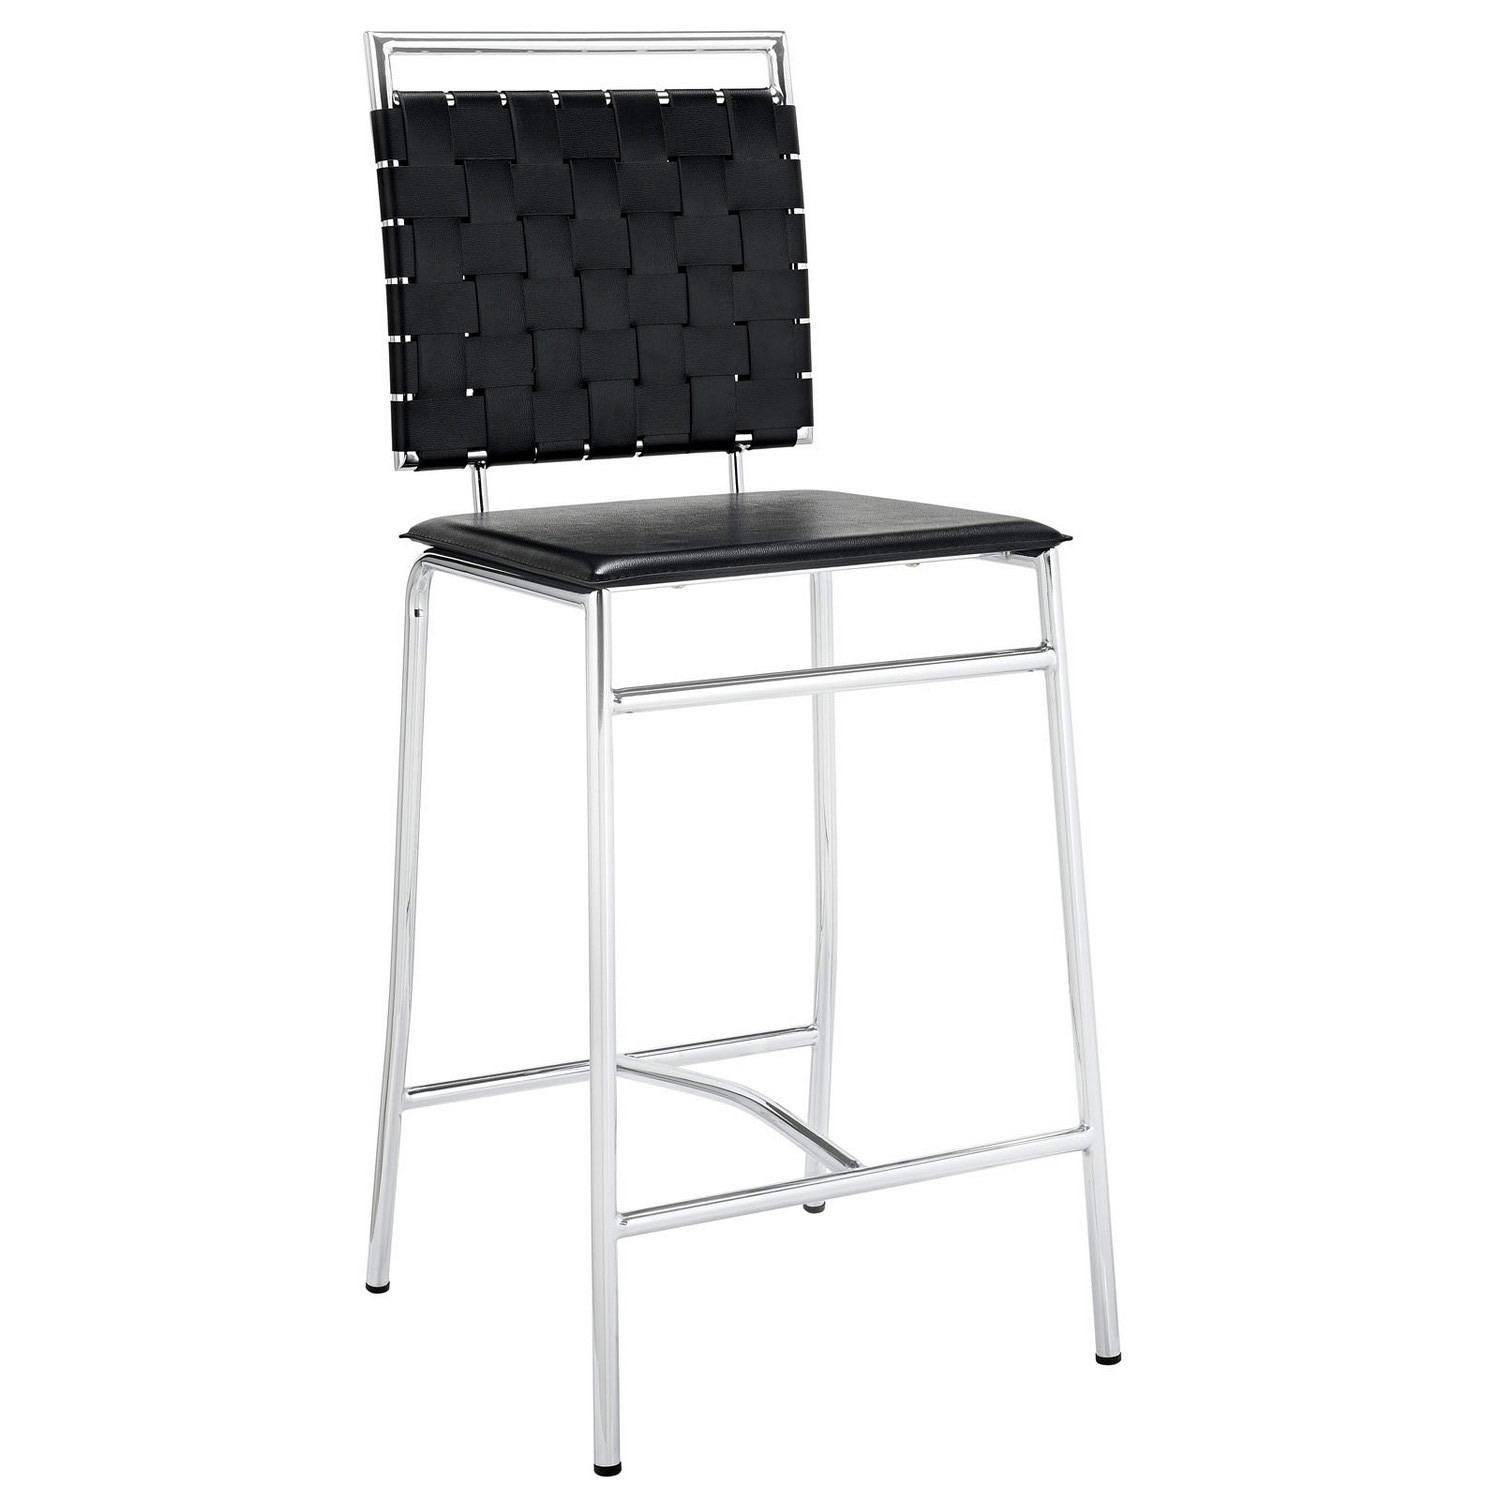 Modway Fuse Counter Stool - Black